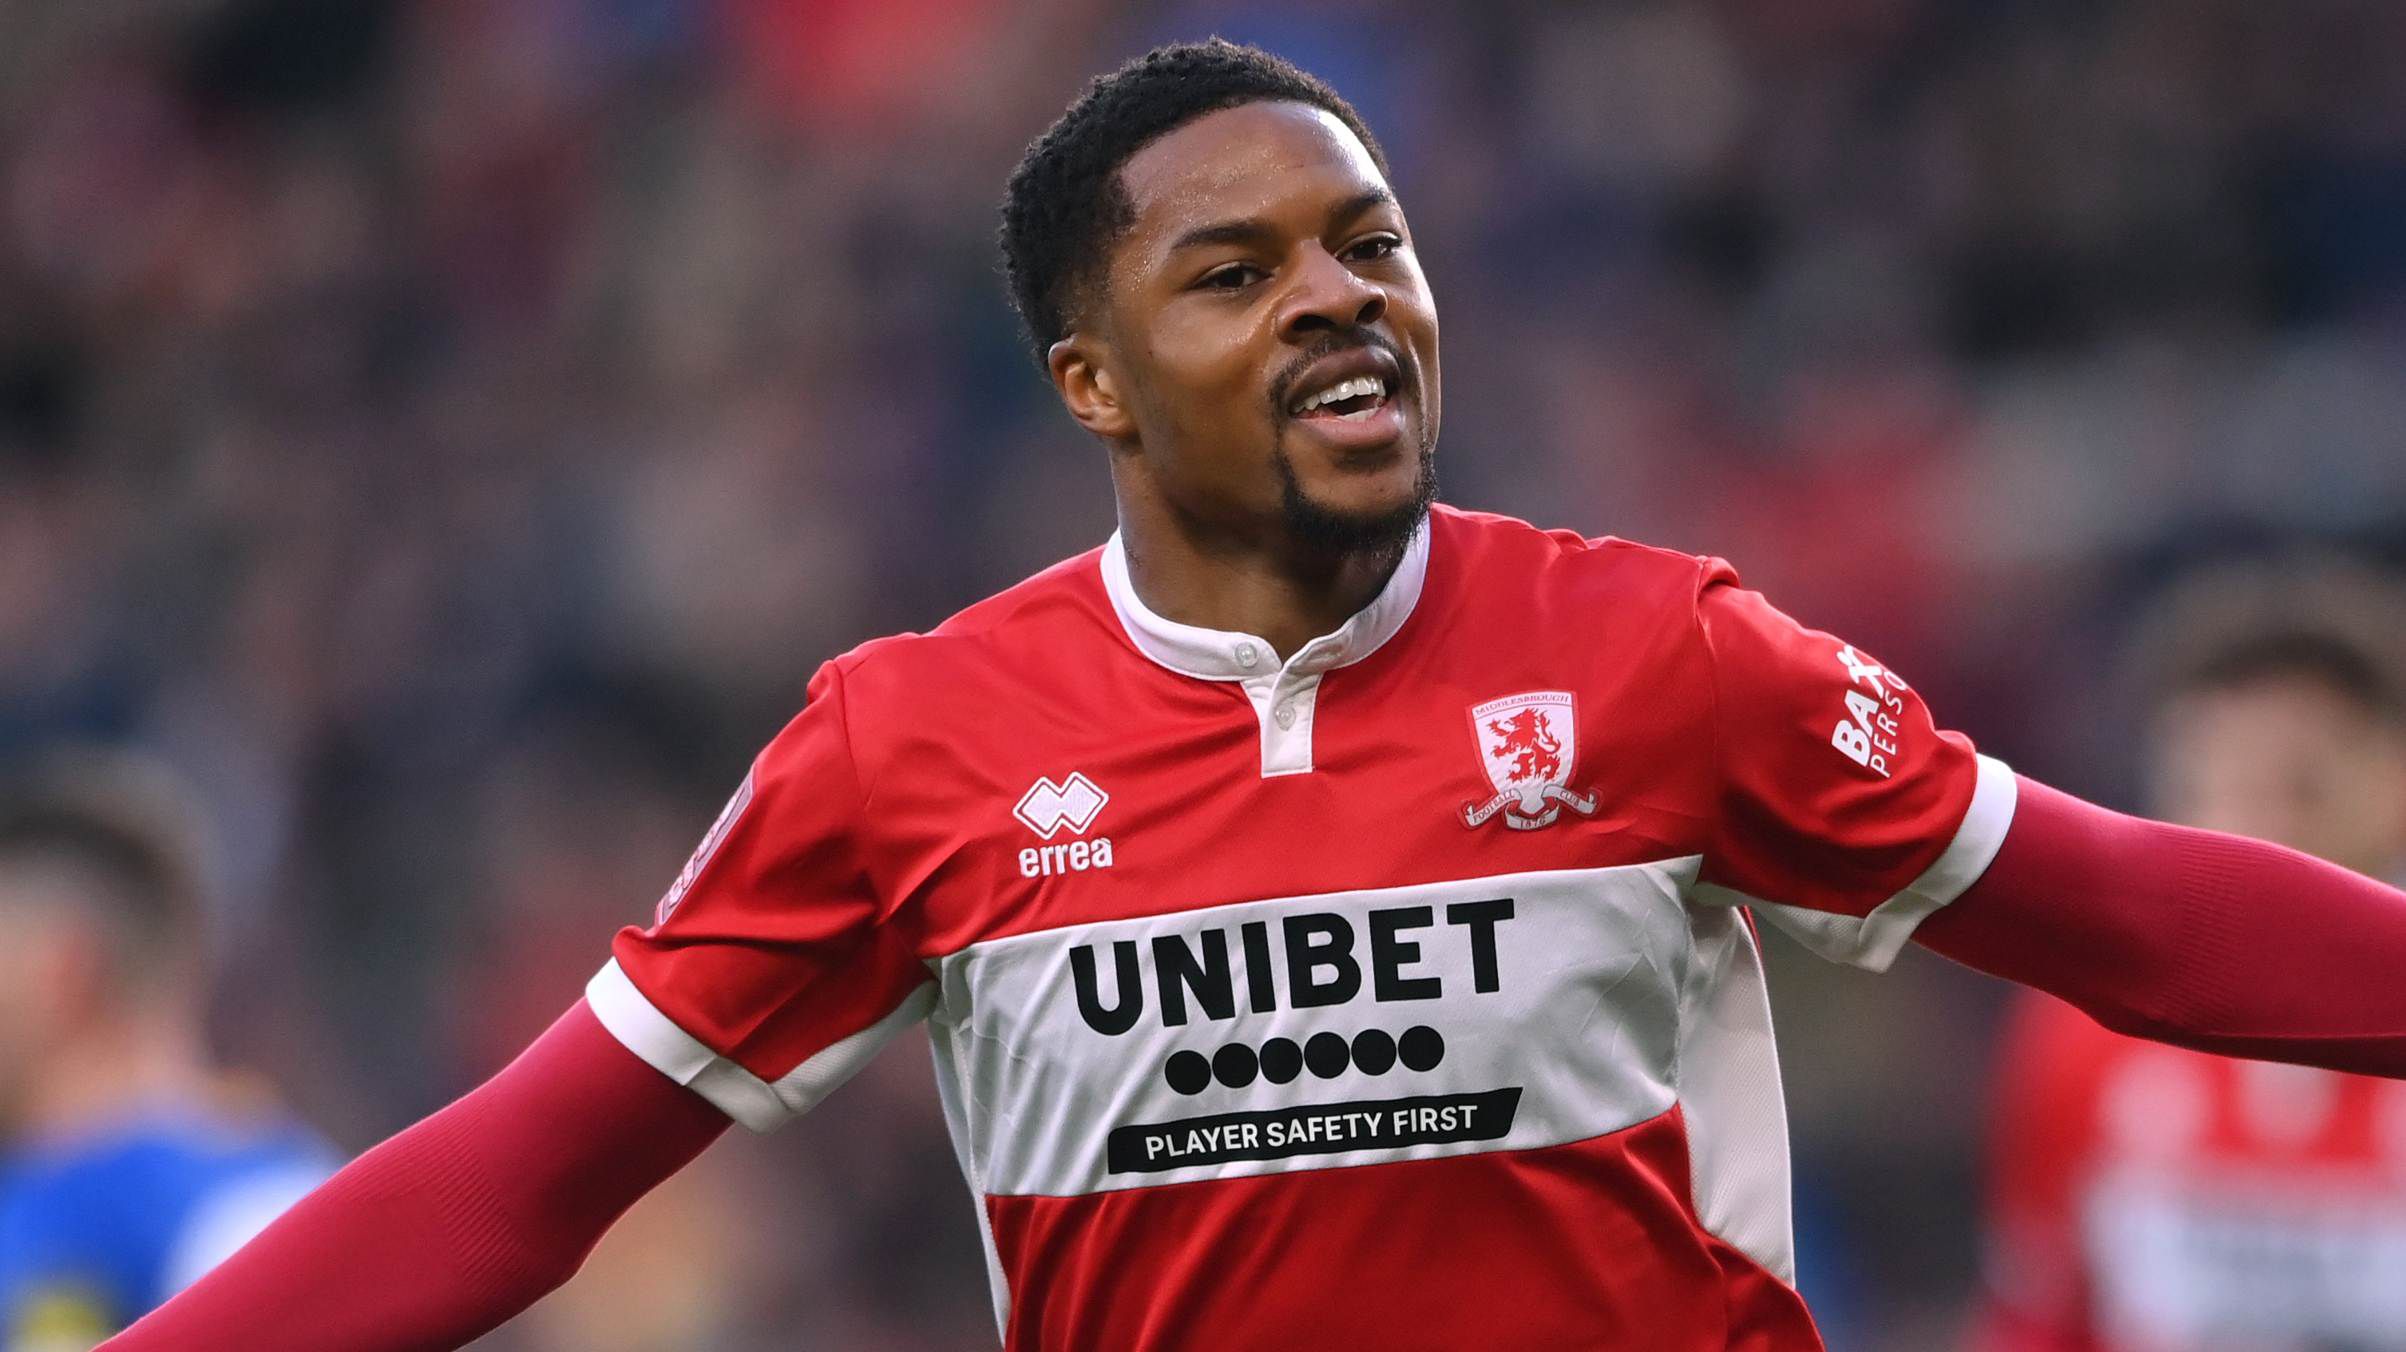 Transfer Talk: Premier League beckons for Chuba Akpom after the